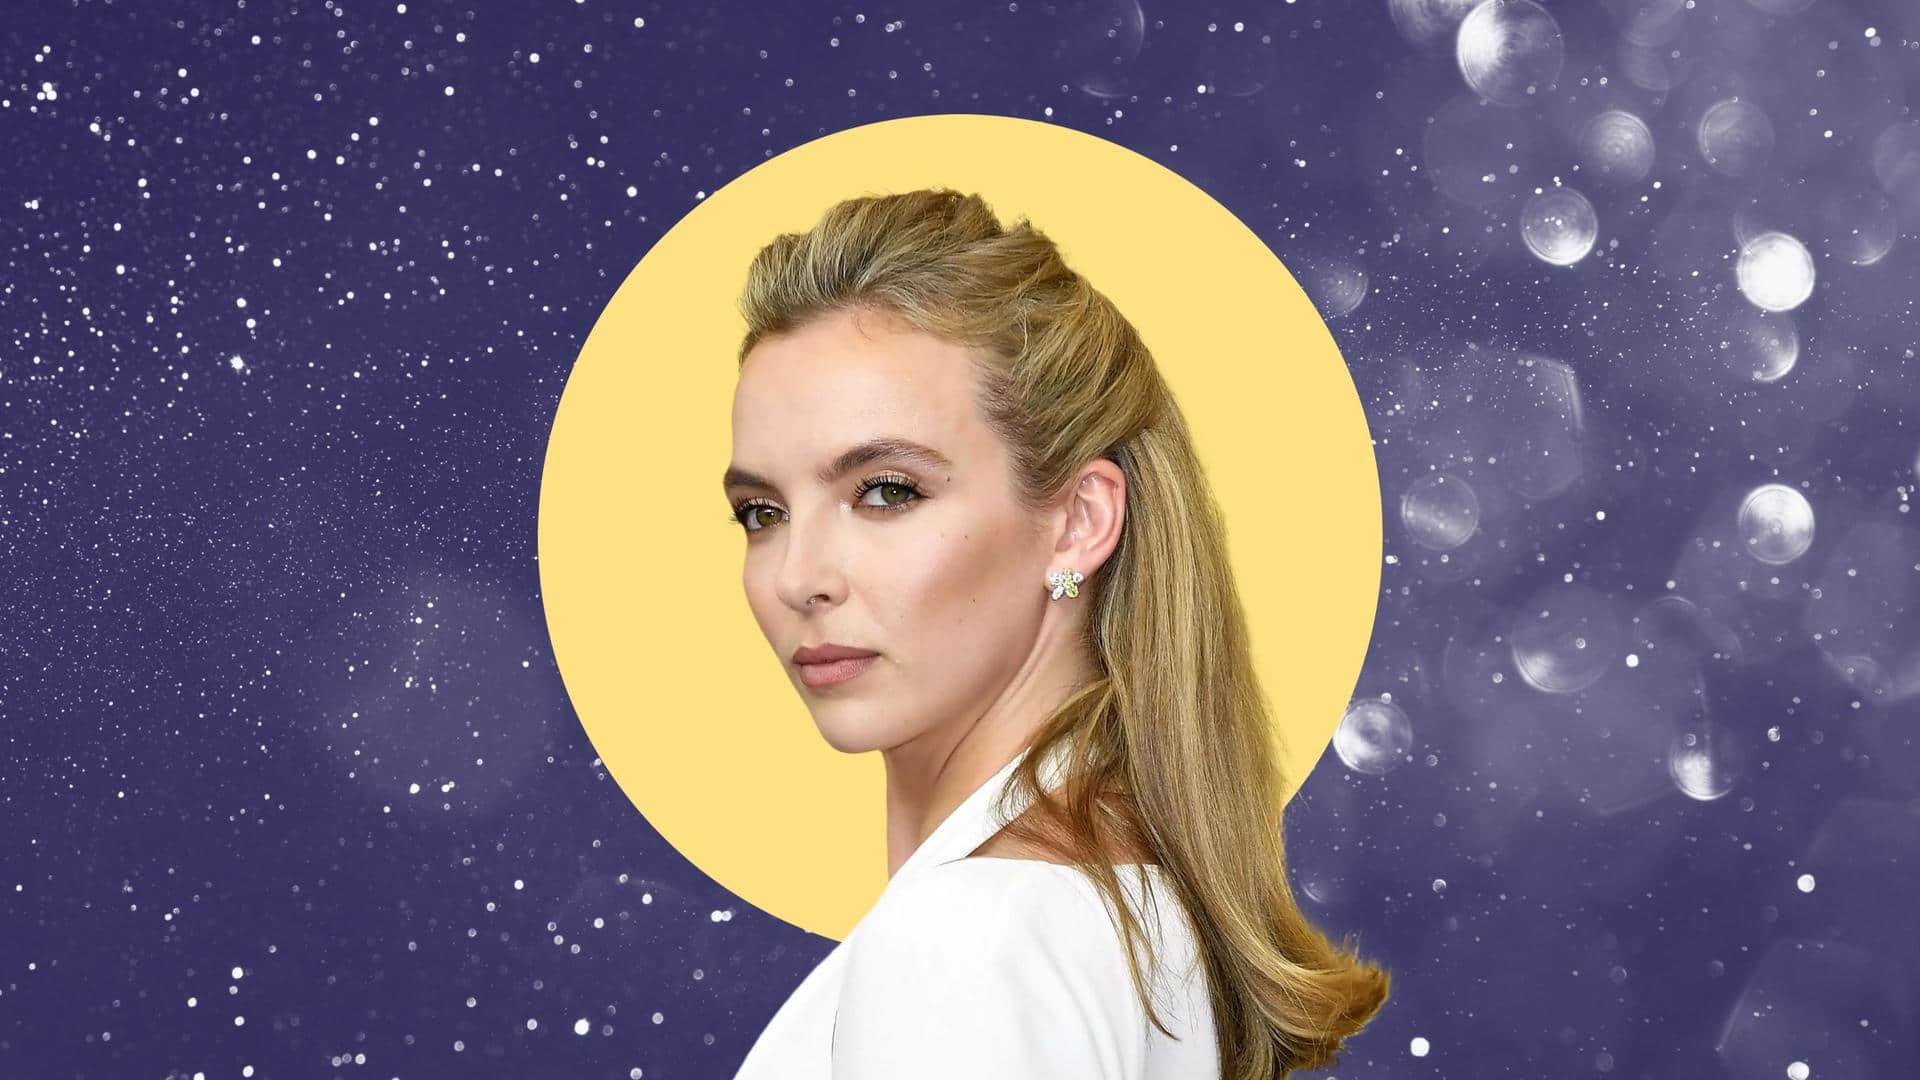 Happy birthday, Jodie Comer: Lesser-known facts about 'Killing Eve' actor